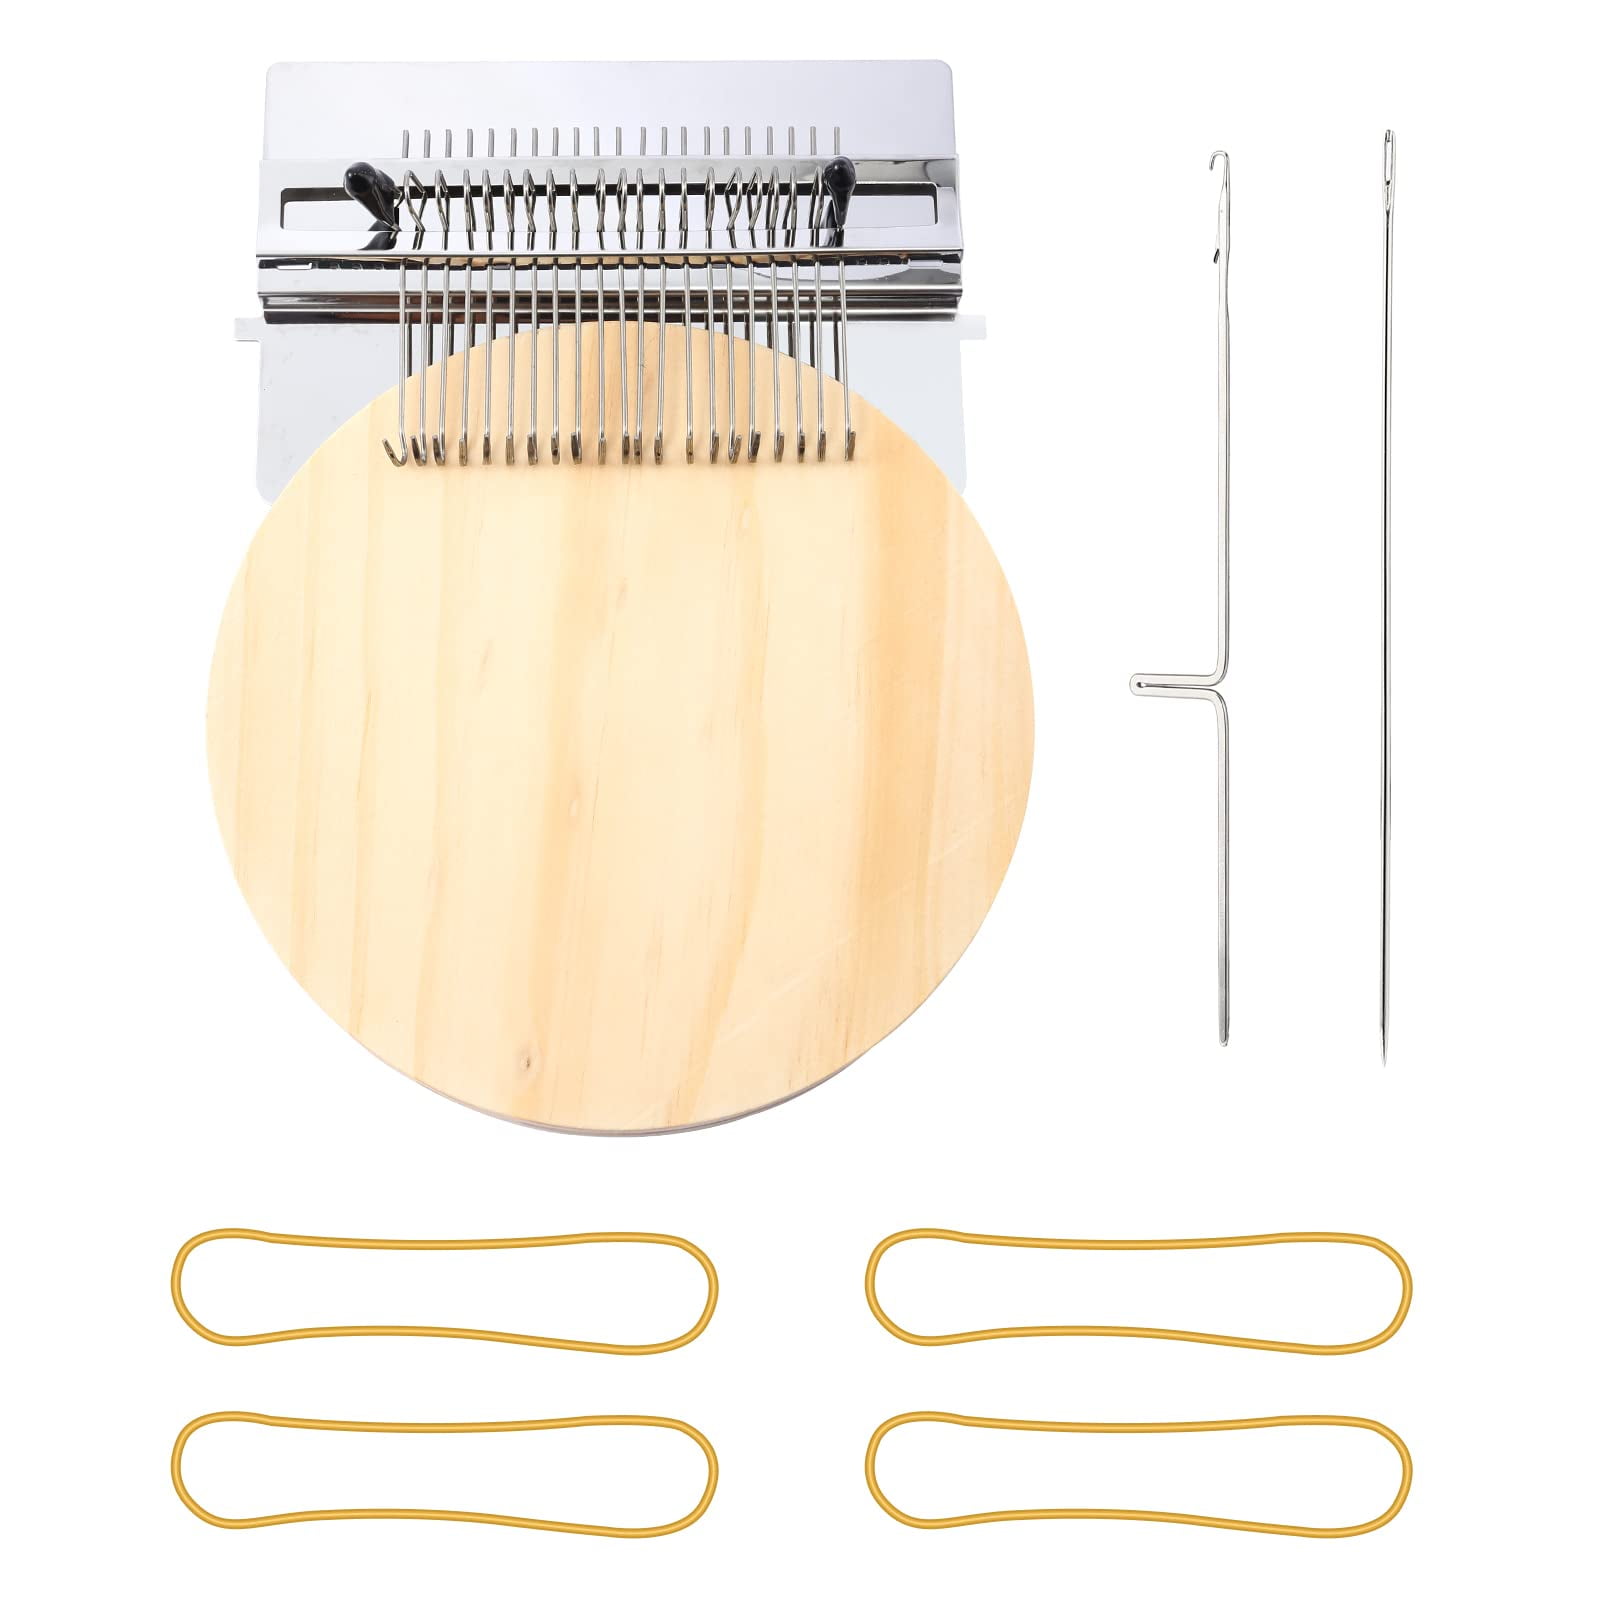 28 Hooks Wooden Darning Tool Creative DIY Weaving Most Convenient Darning Loom for Beginners Small Loom-Speedweve Type Weave Tool